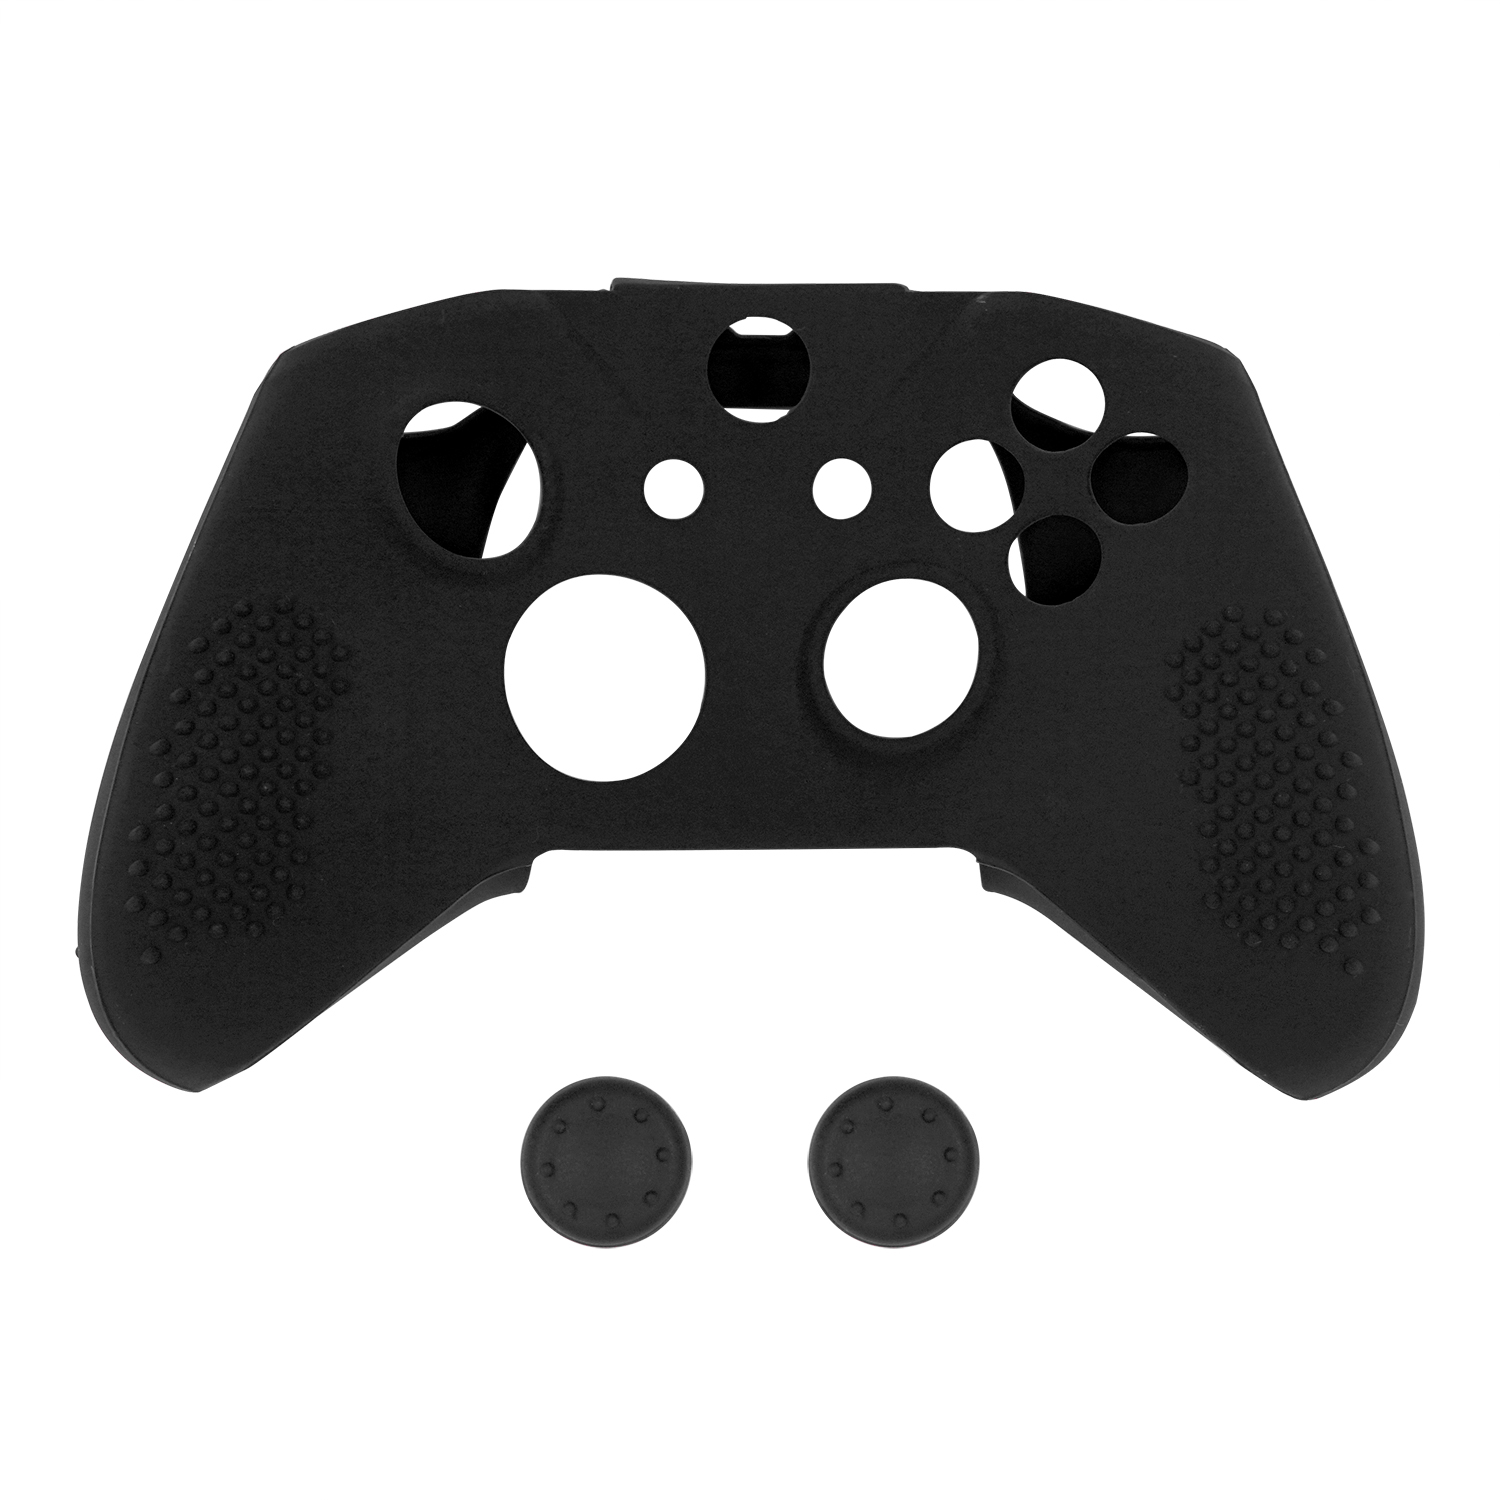 Soft Anti-Slip Silicone Controller Cover Skins Thumb Grips Caps ...